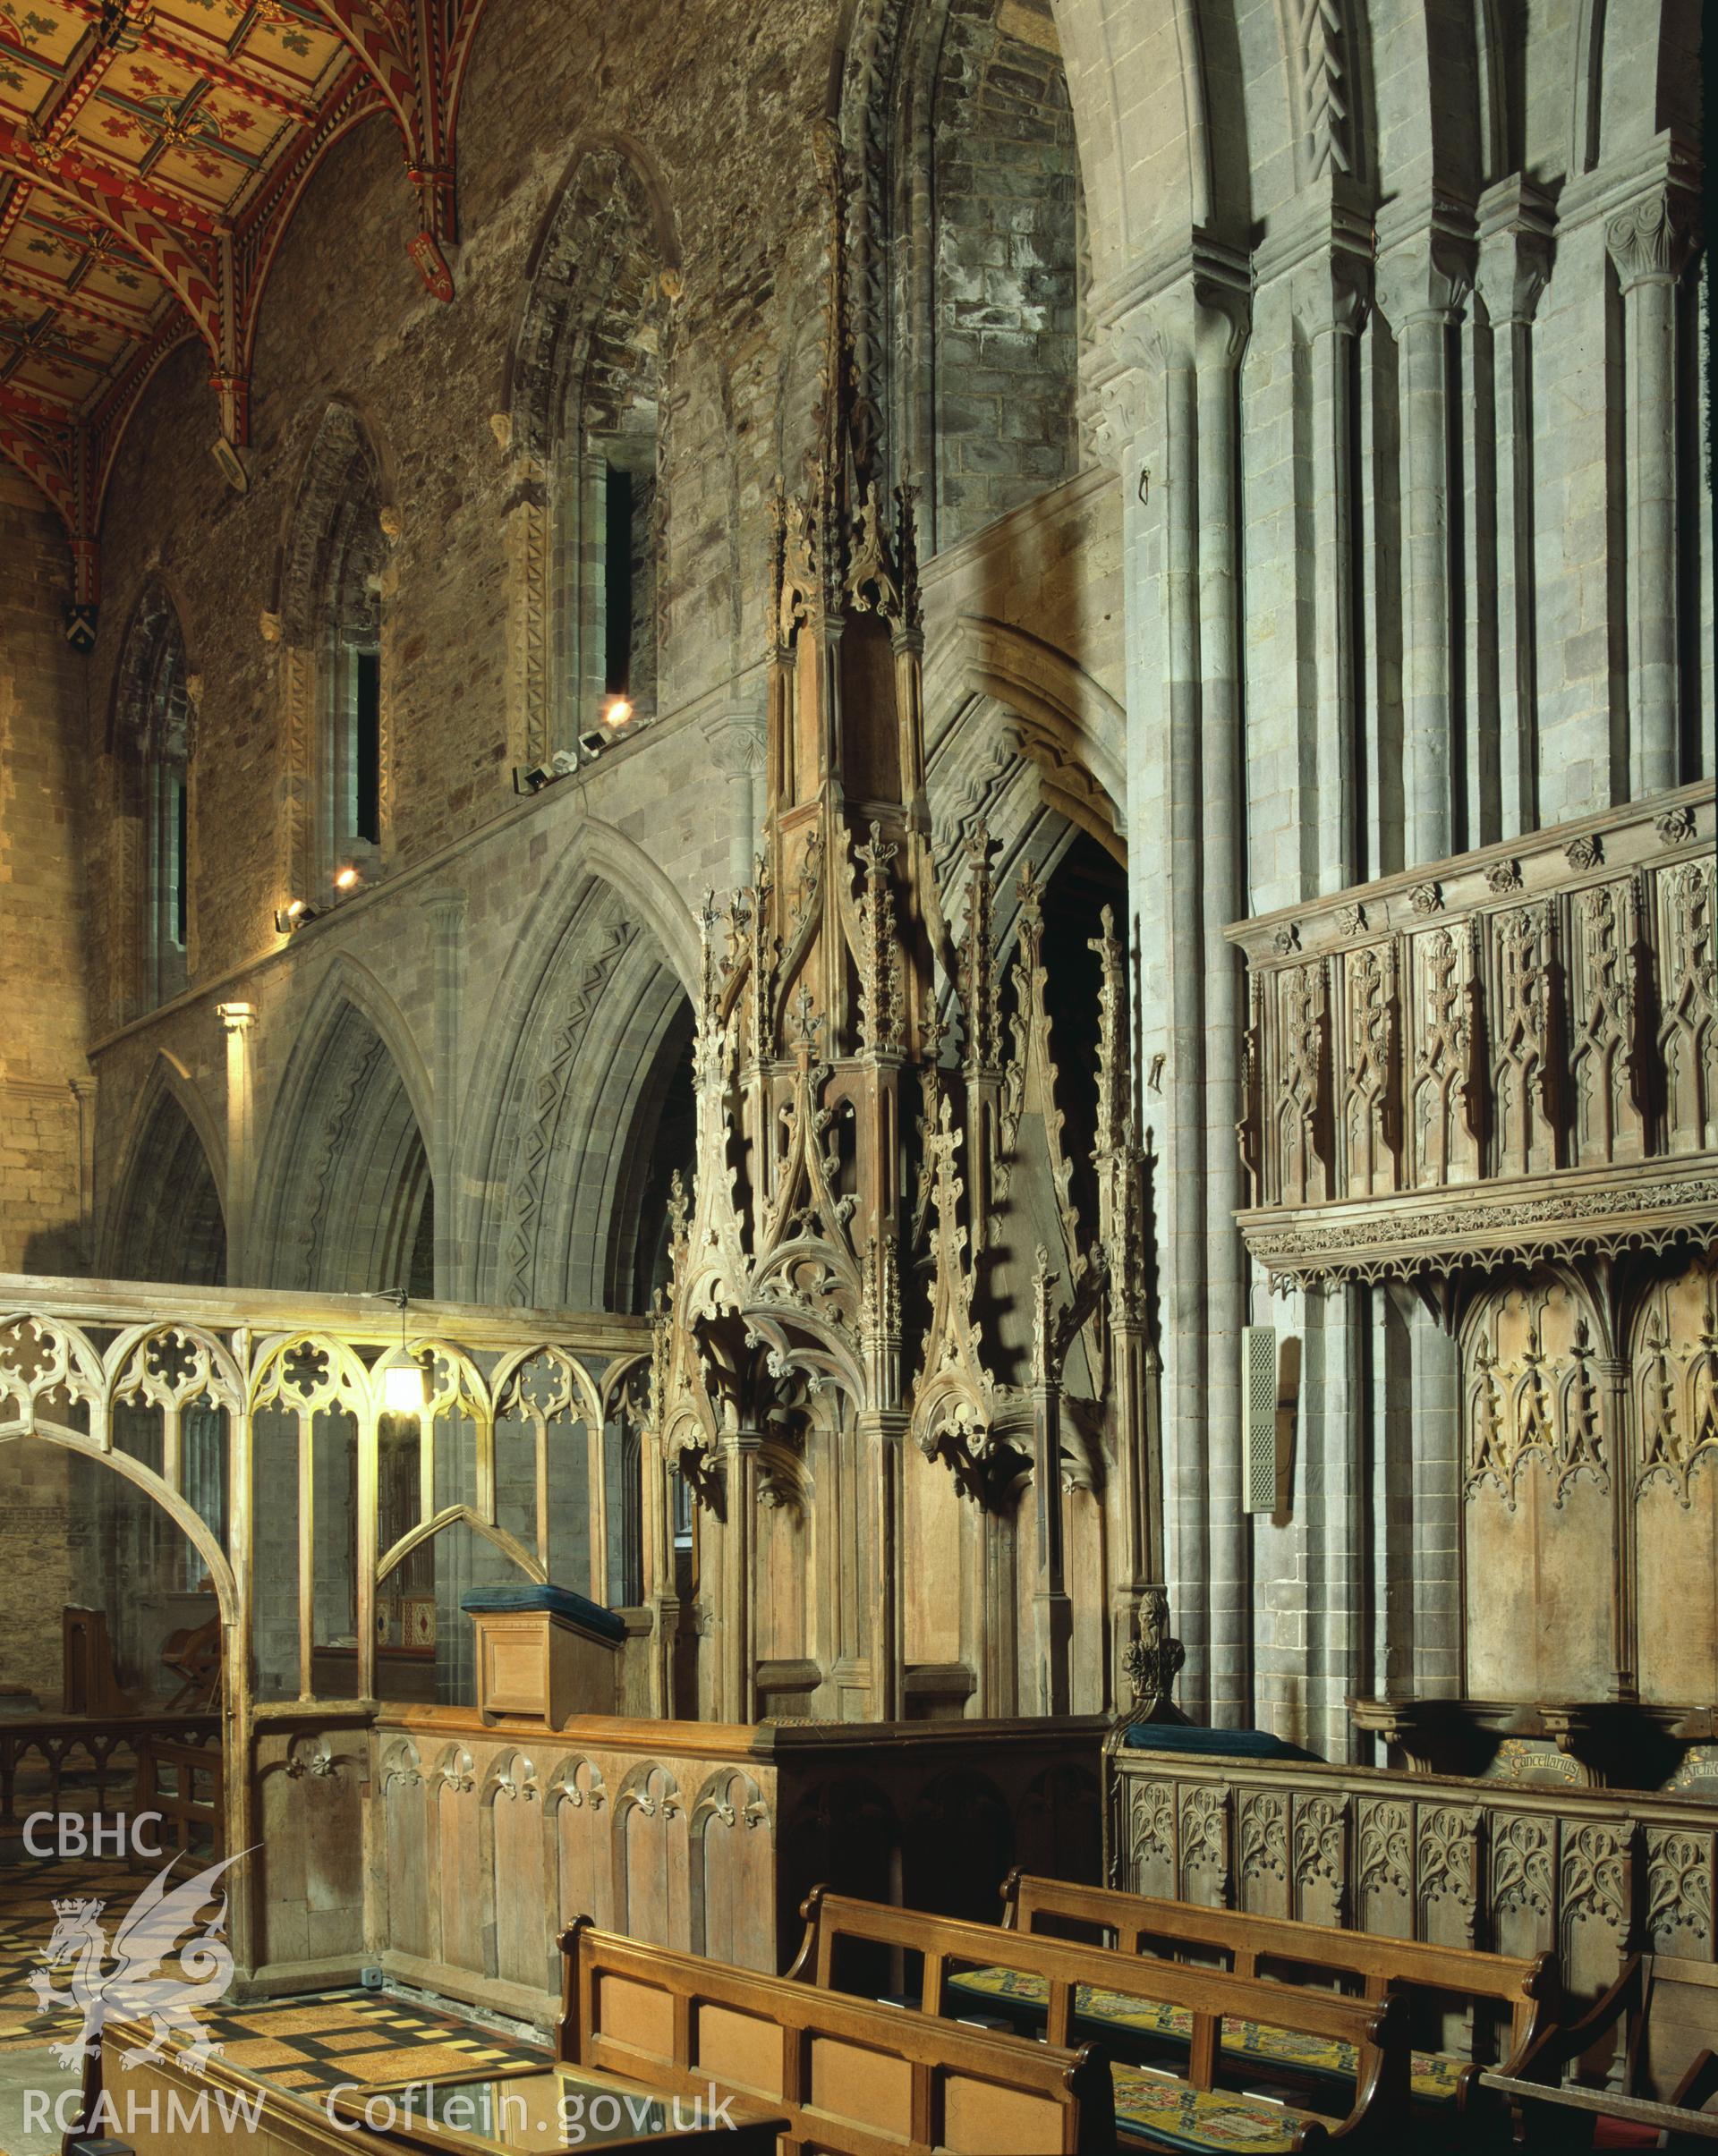 RCAHMW colour transparency showing the Bishops Throne at St Davids Cathedral, taken by RCAHMW, 2003